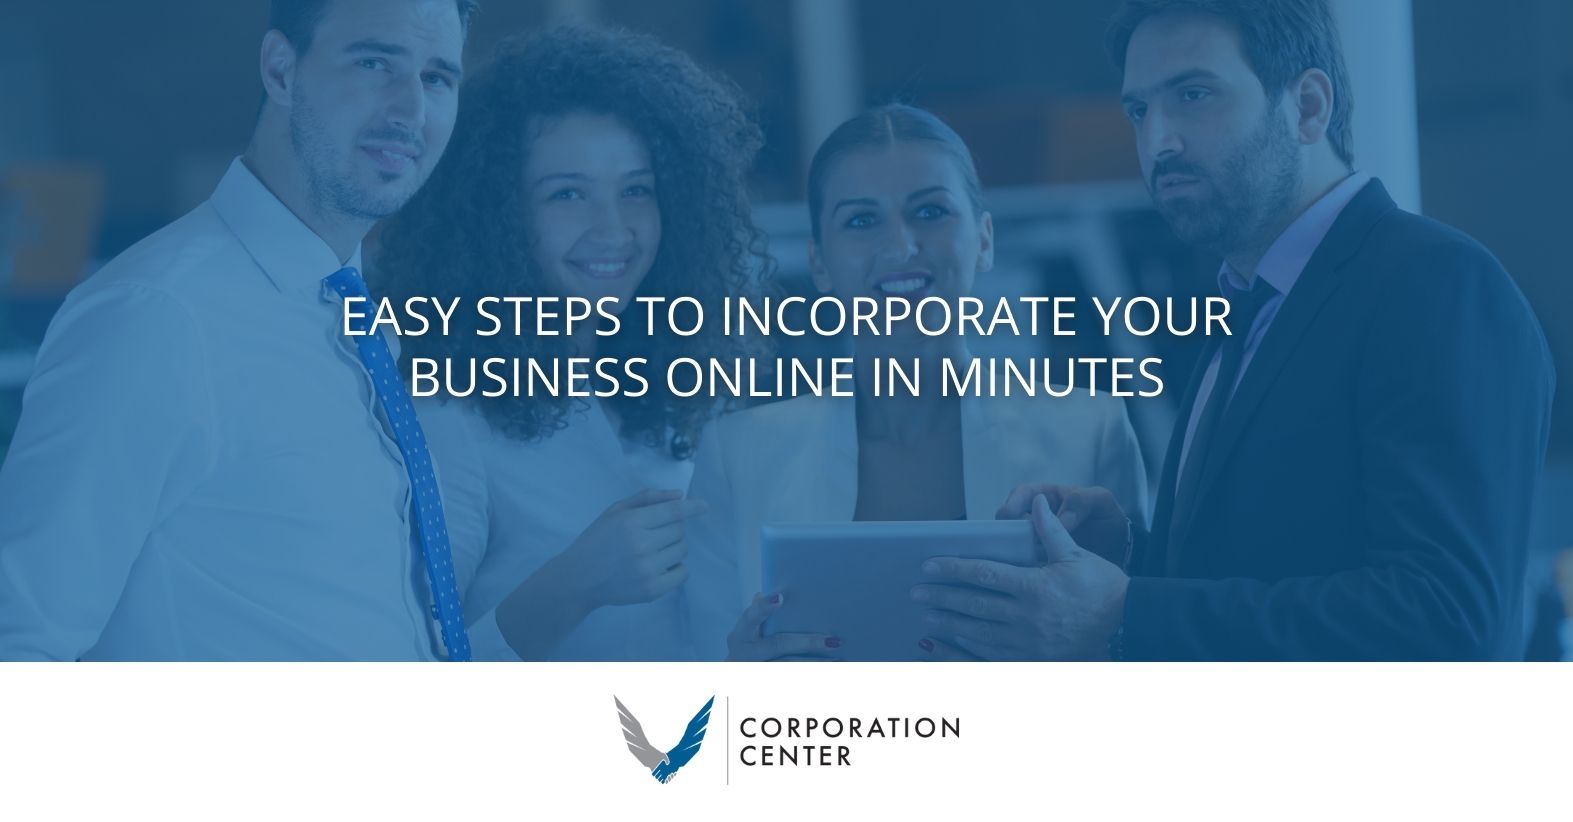 Incorporate Your Business Online